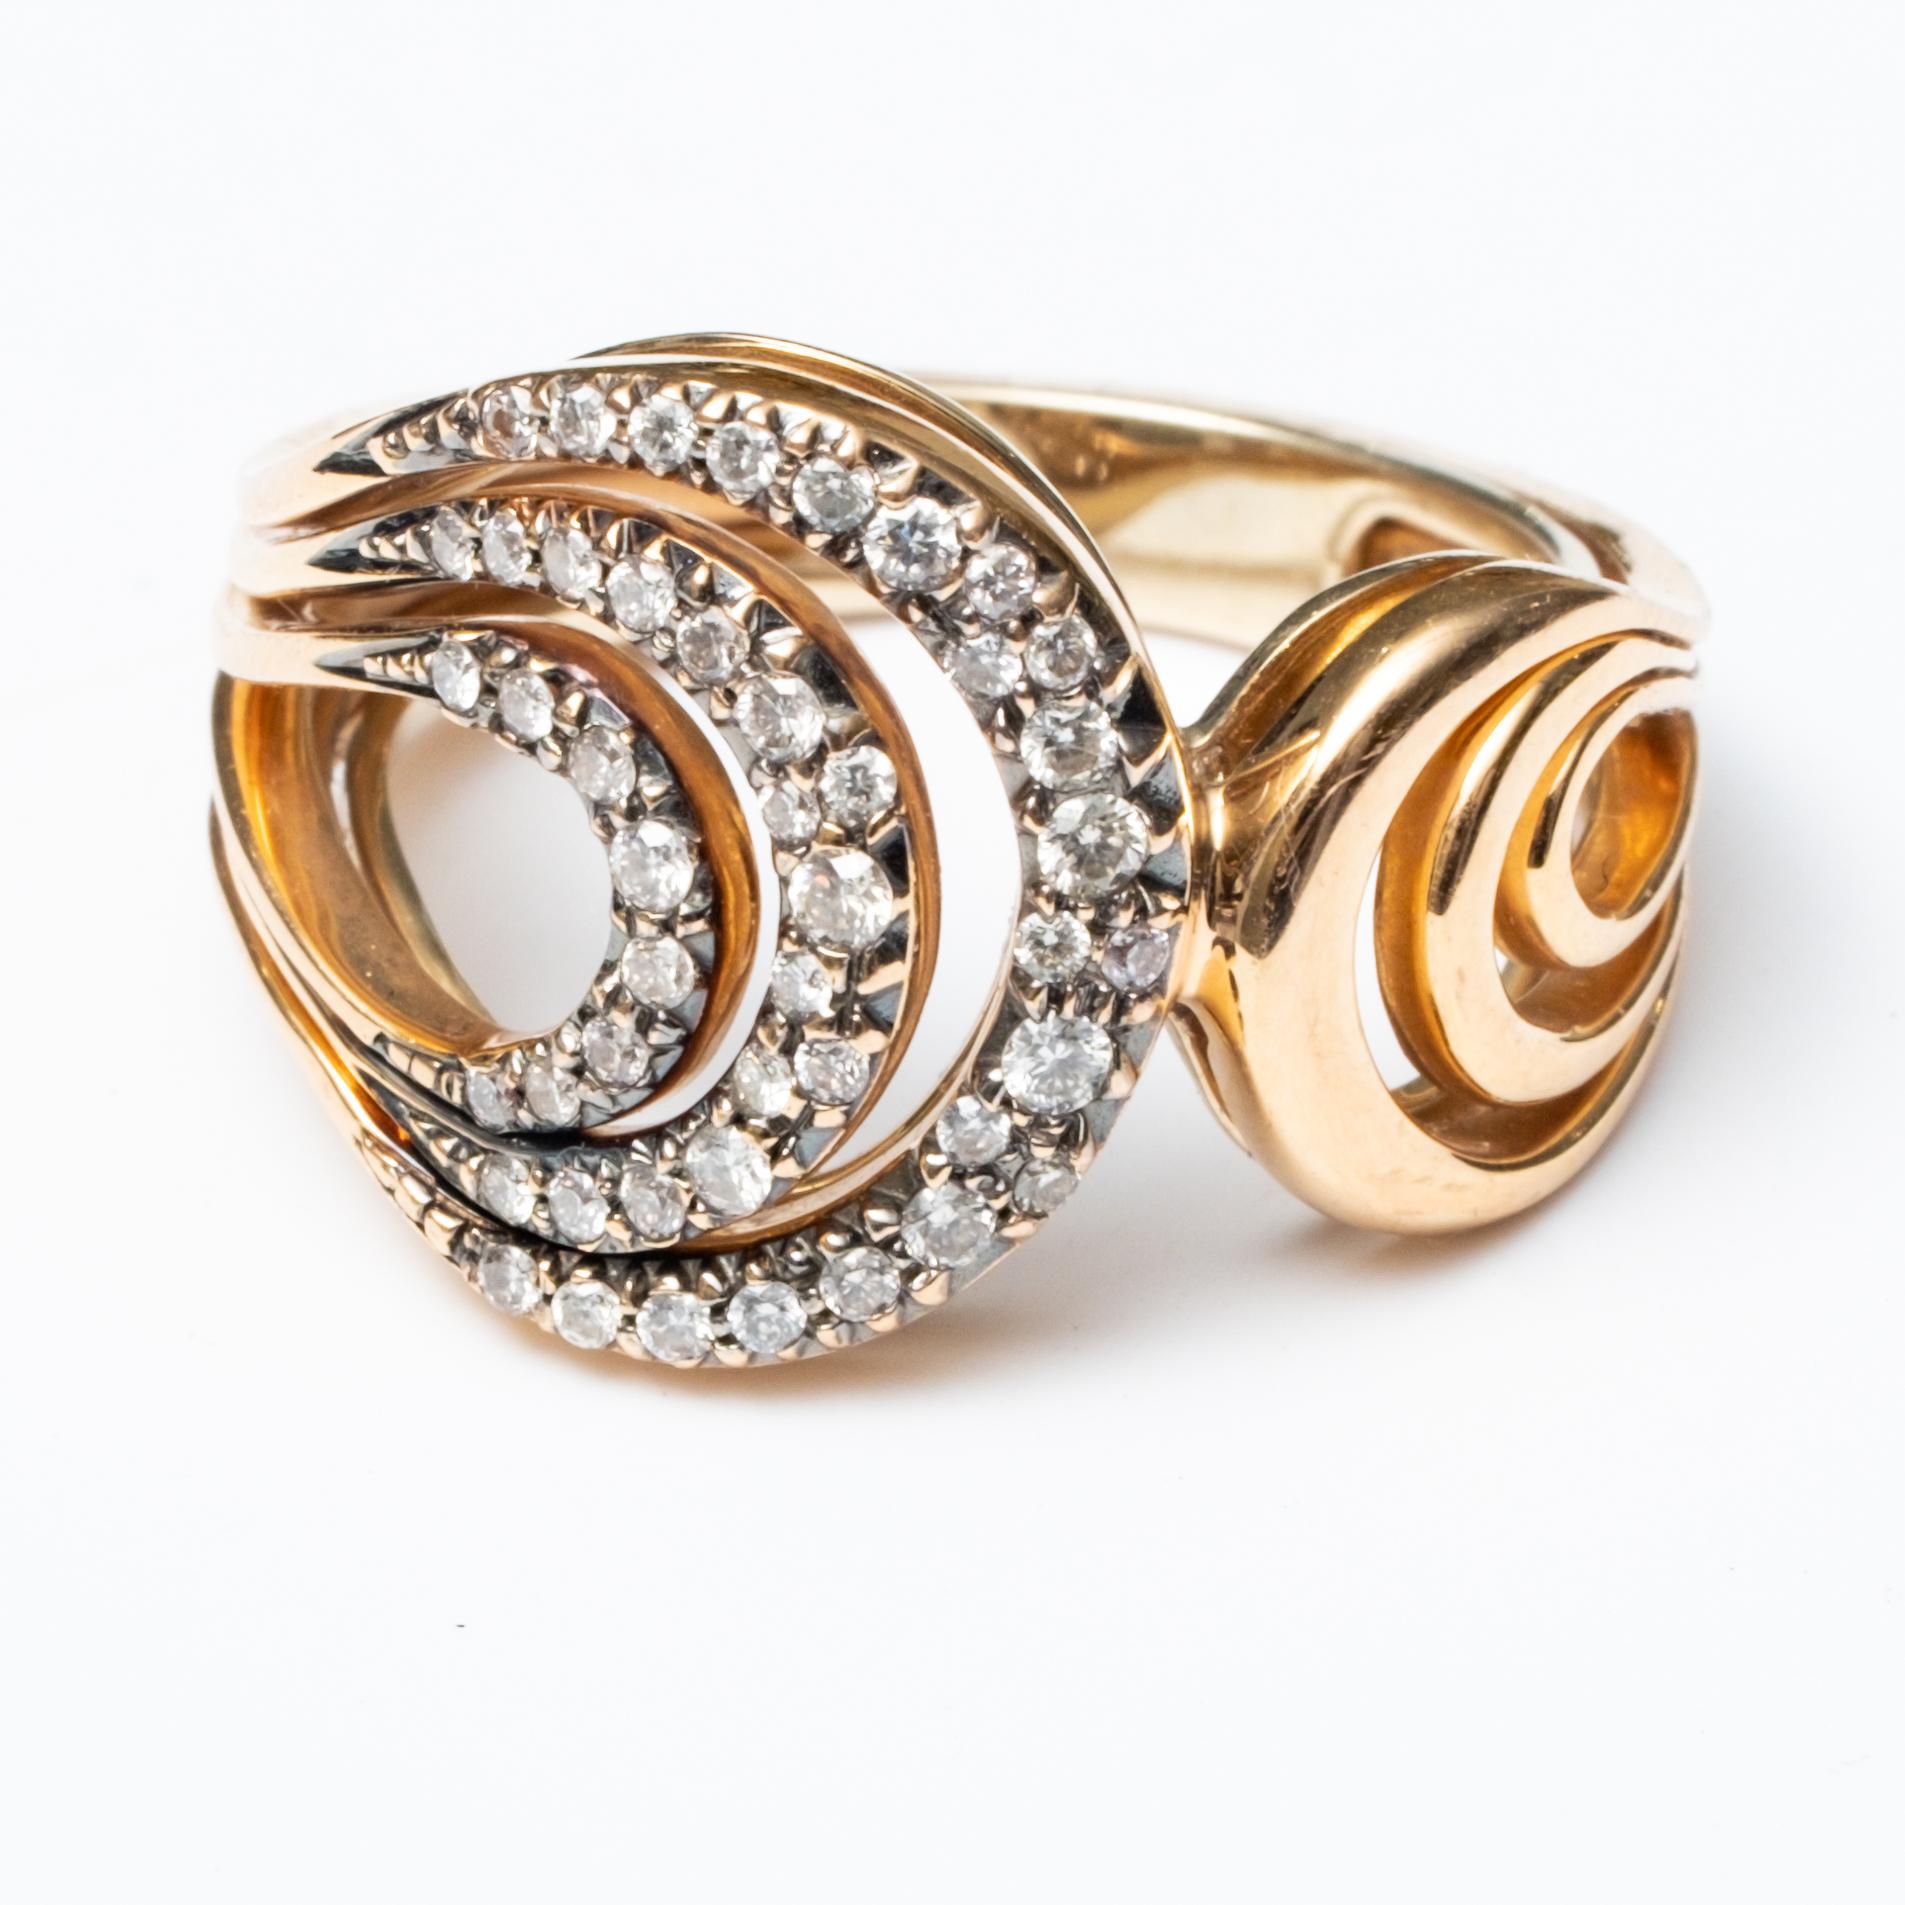 H. Stern 18K Rose Gold and Diamond Ring. This ring is part of the Iris collection. It is set with round diamonds in a swirl pattern. The ring is a size 7.5 and weighs 9.1 grams. 23 diamonds and approx total .65 cw in diamonds. signed and in good